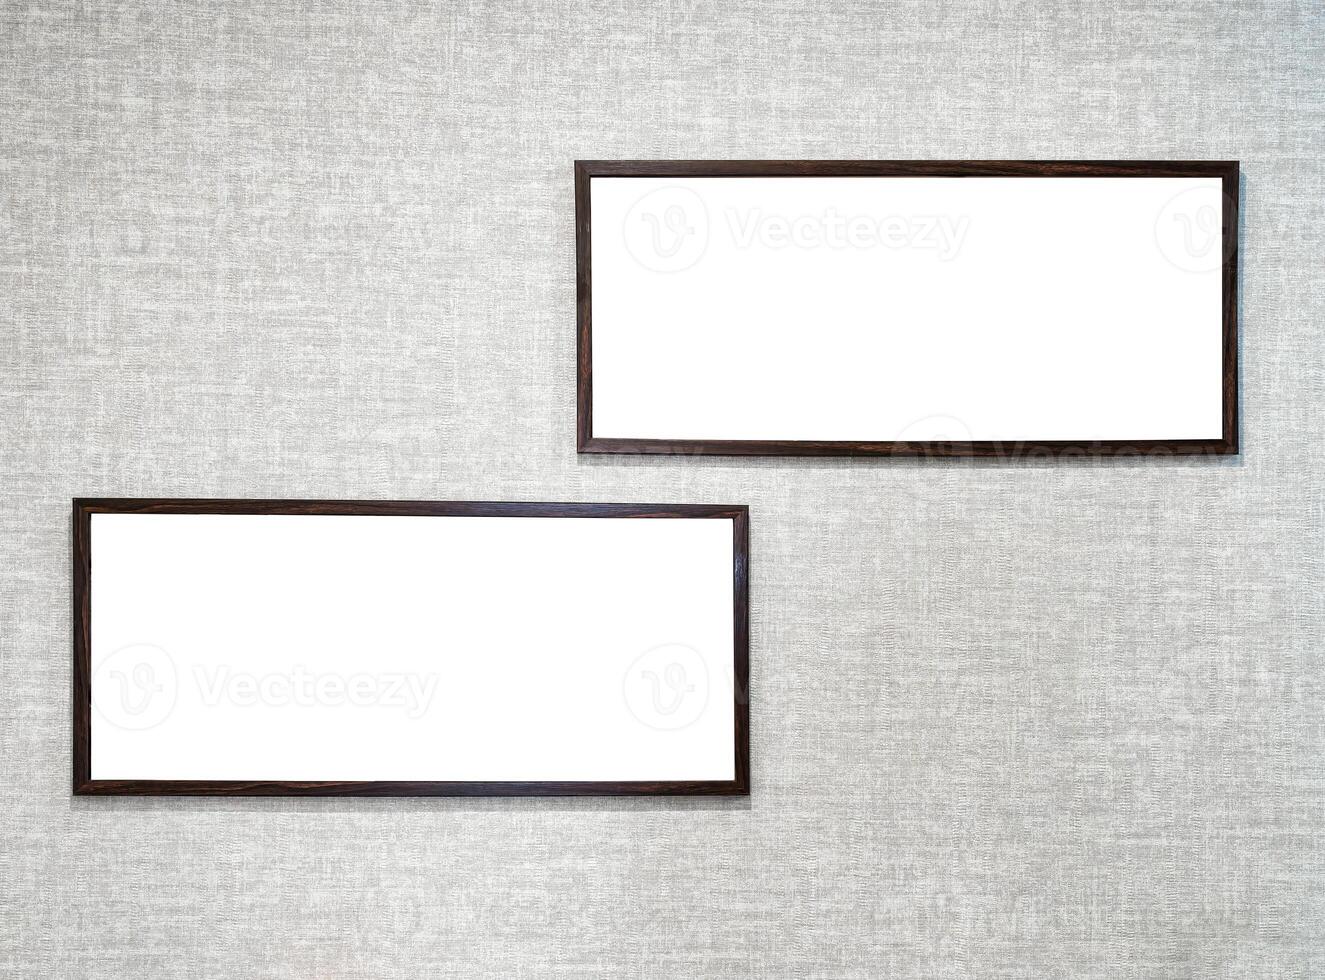 Two picture frames with copy space for text hanging on the wall with wallpaper. Mockup for design. photo